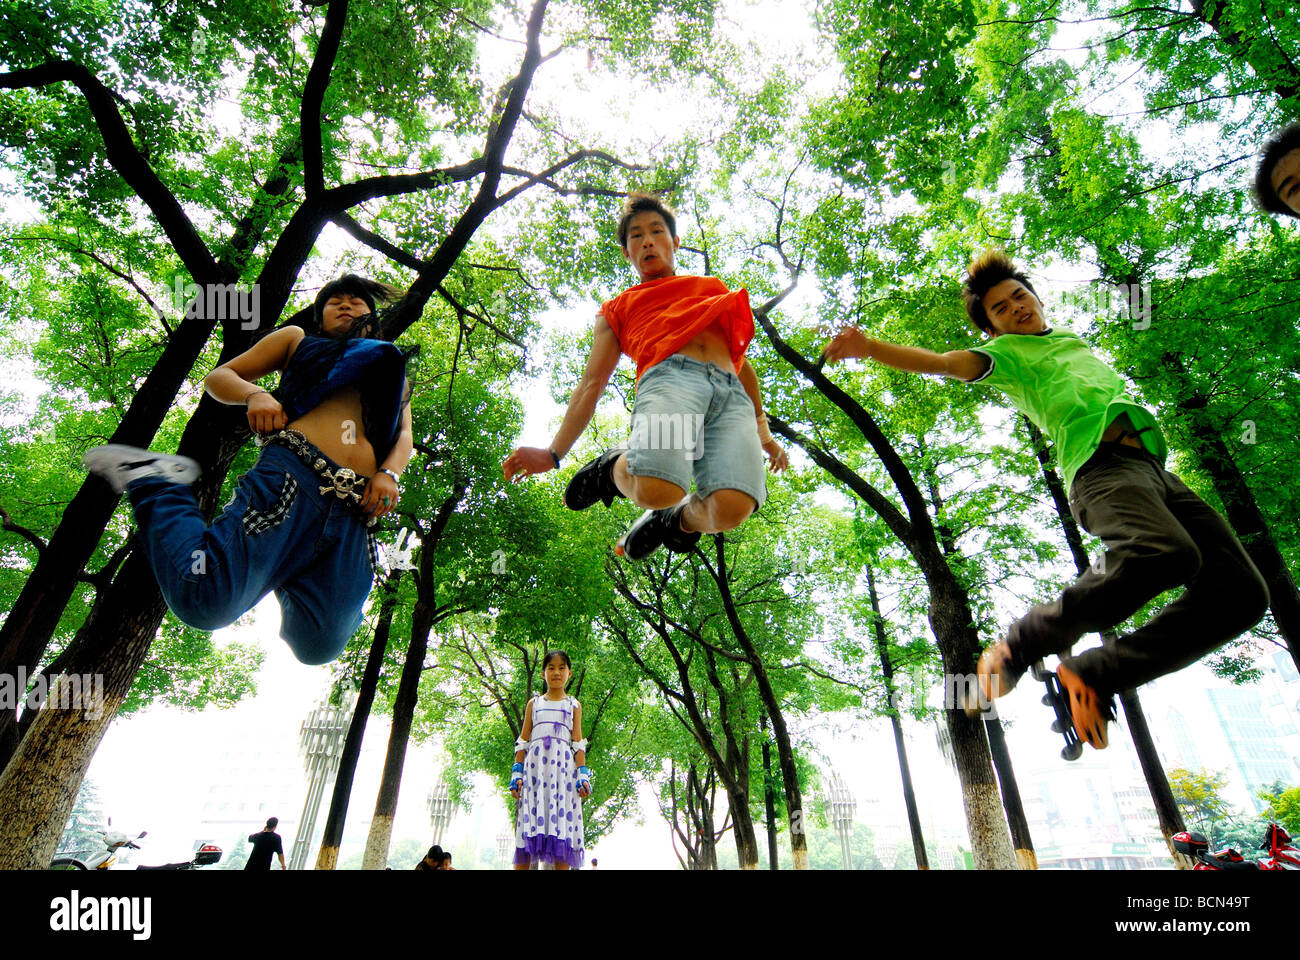 Teenagers practicing street dance in the park, Shanghai, China Stock Photo